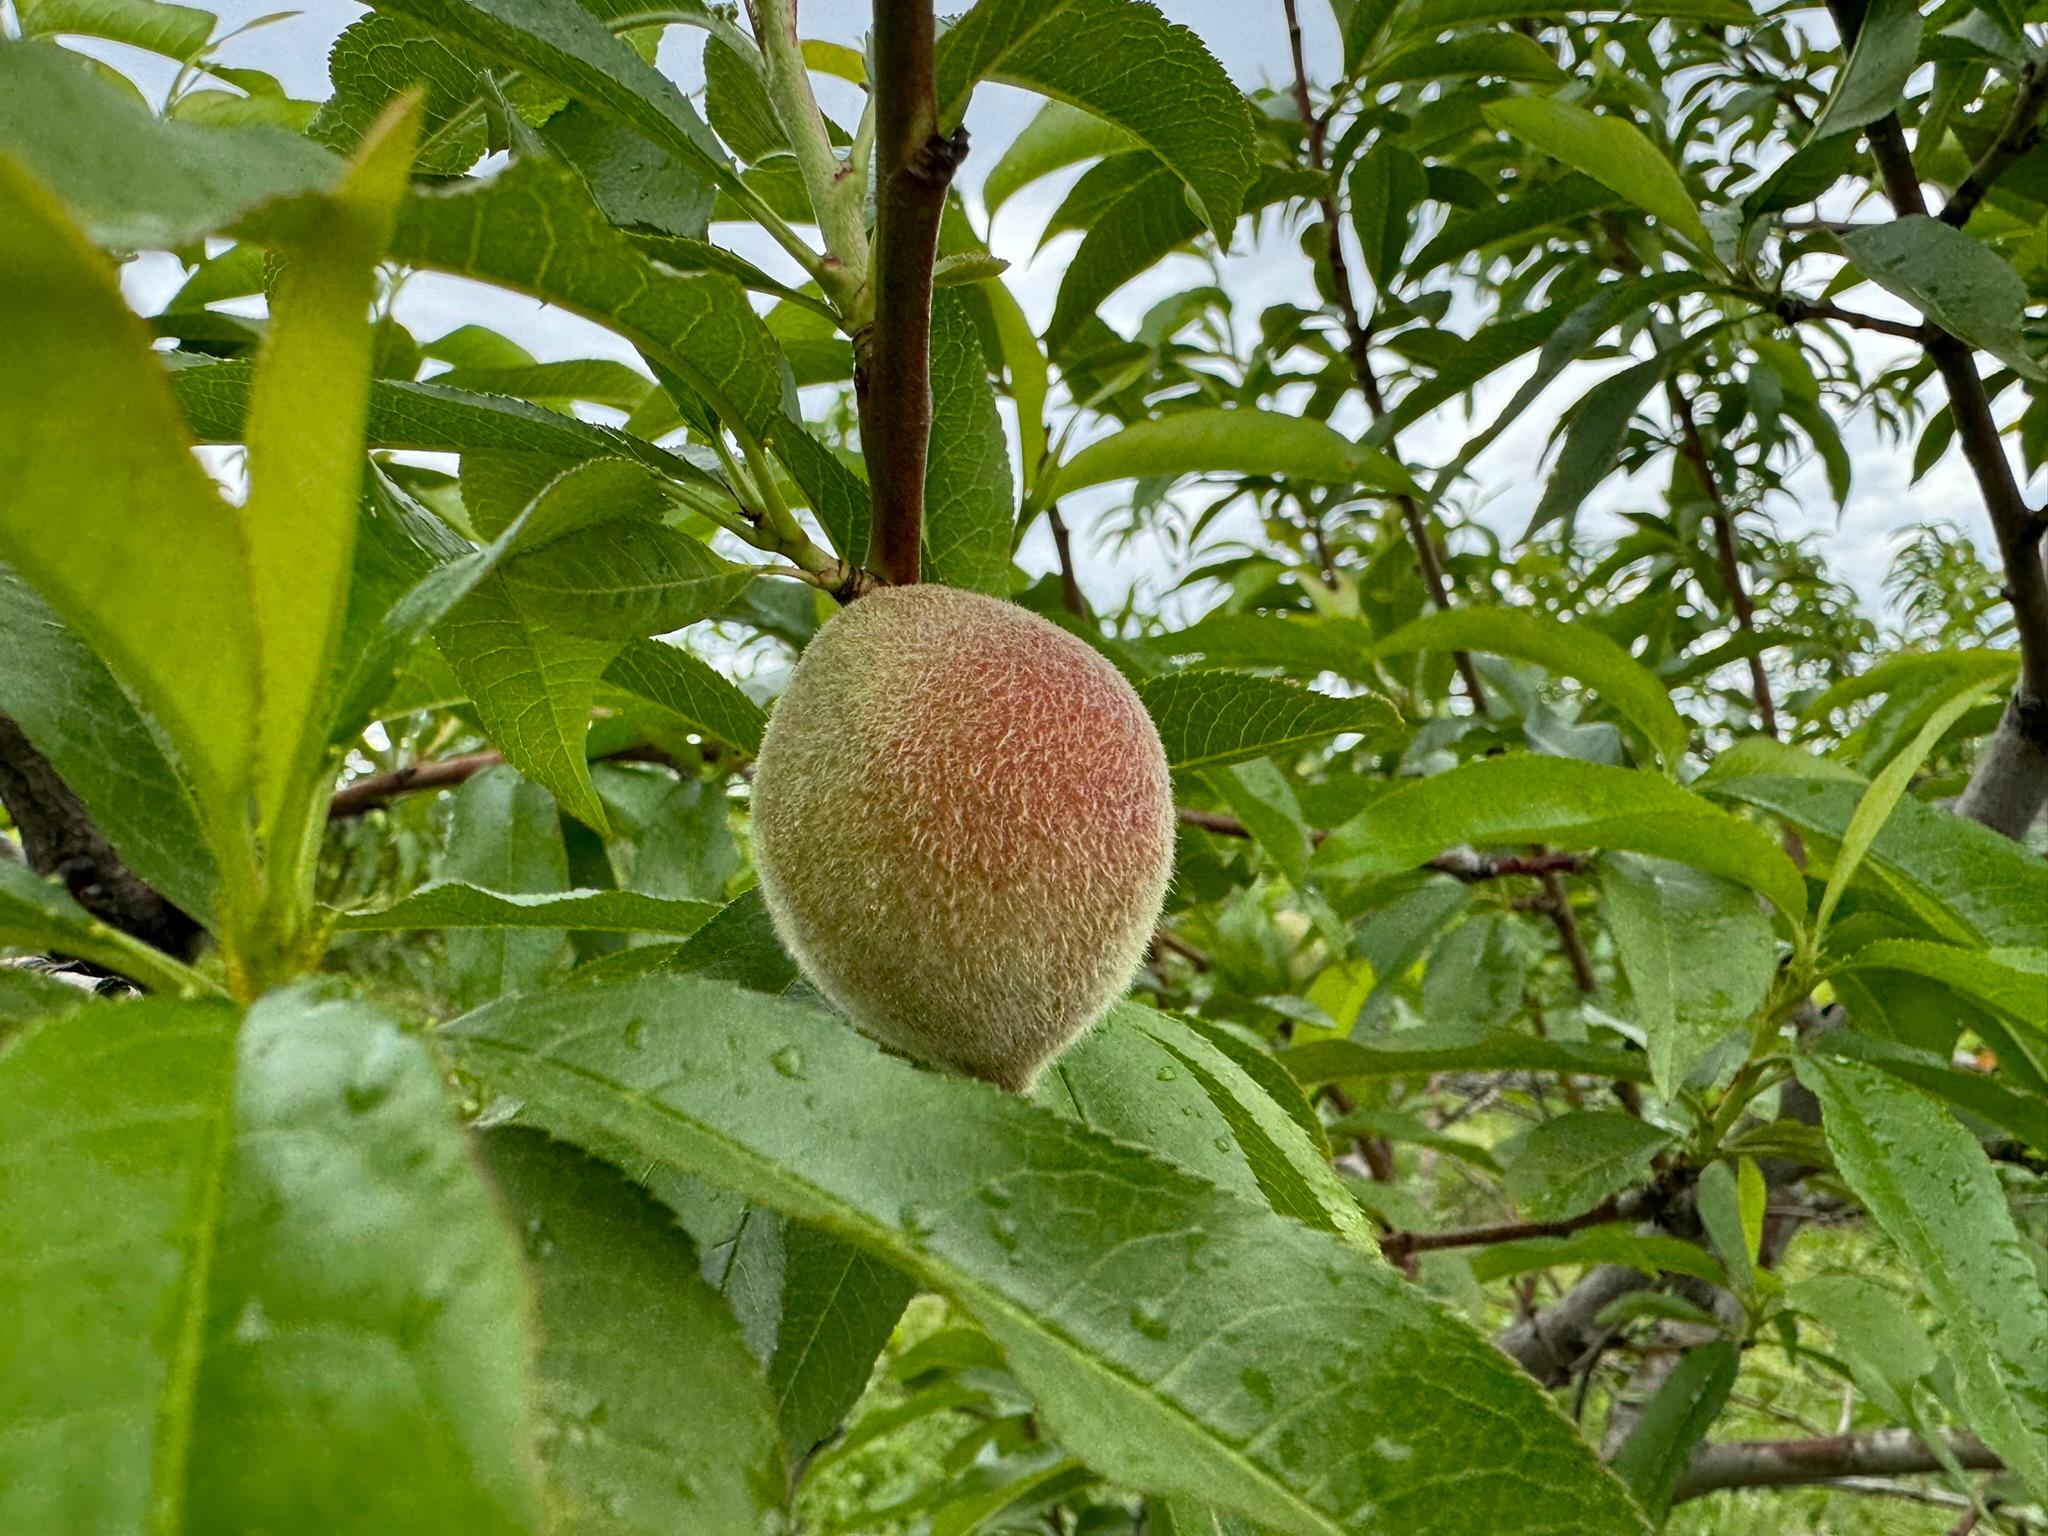 A peach hanging from a tree.